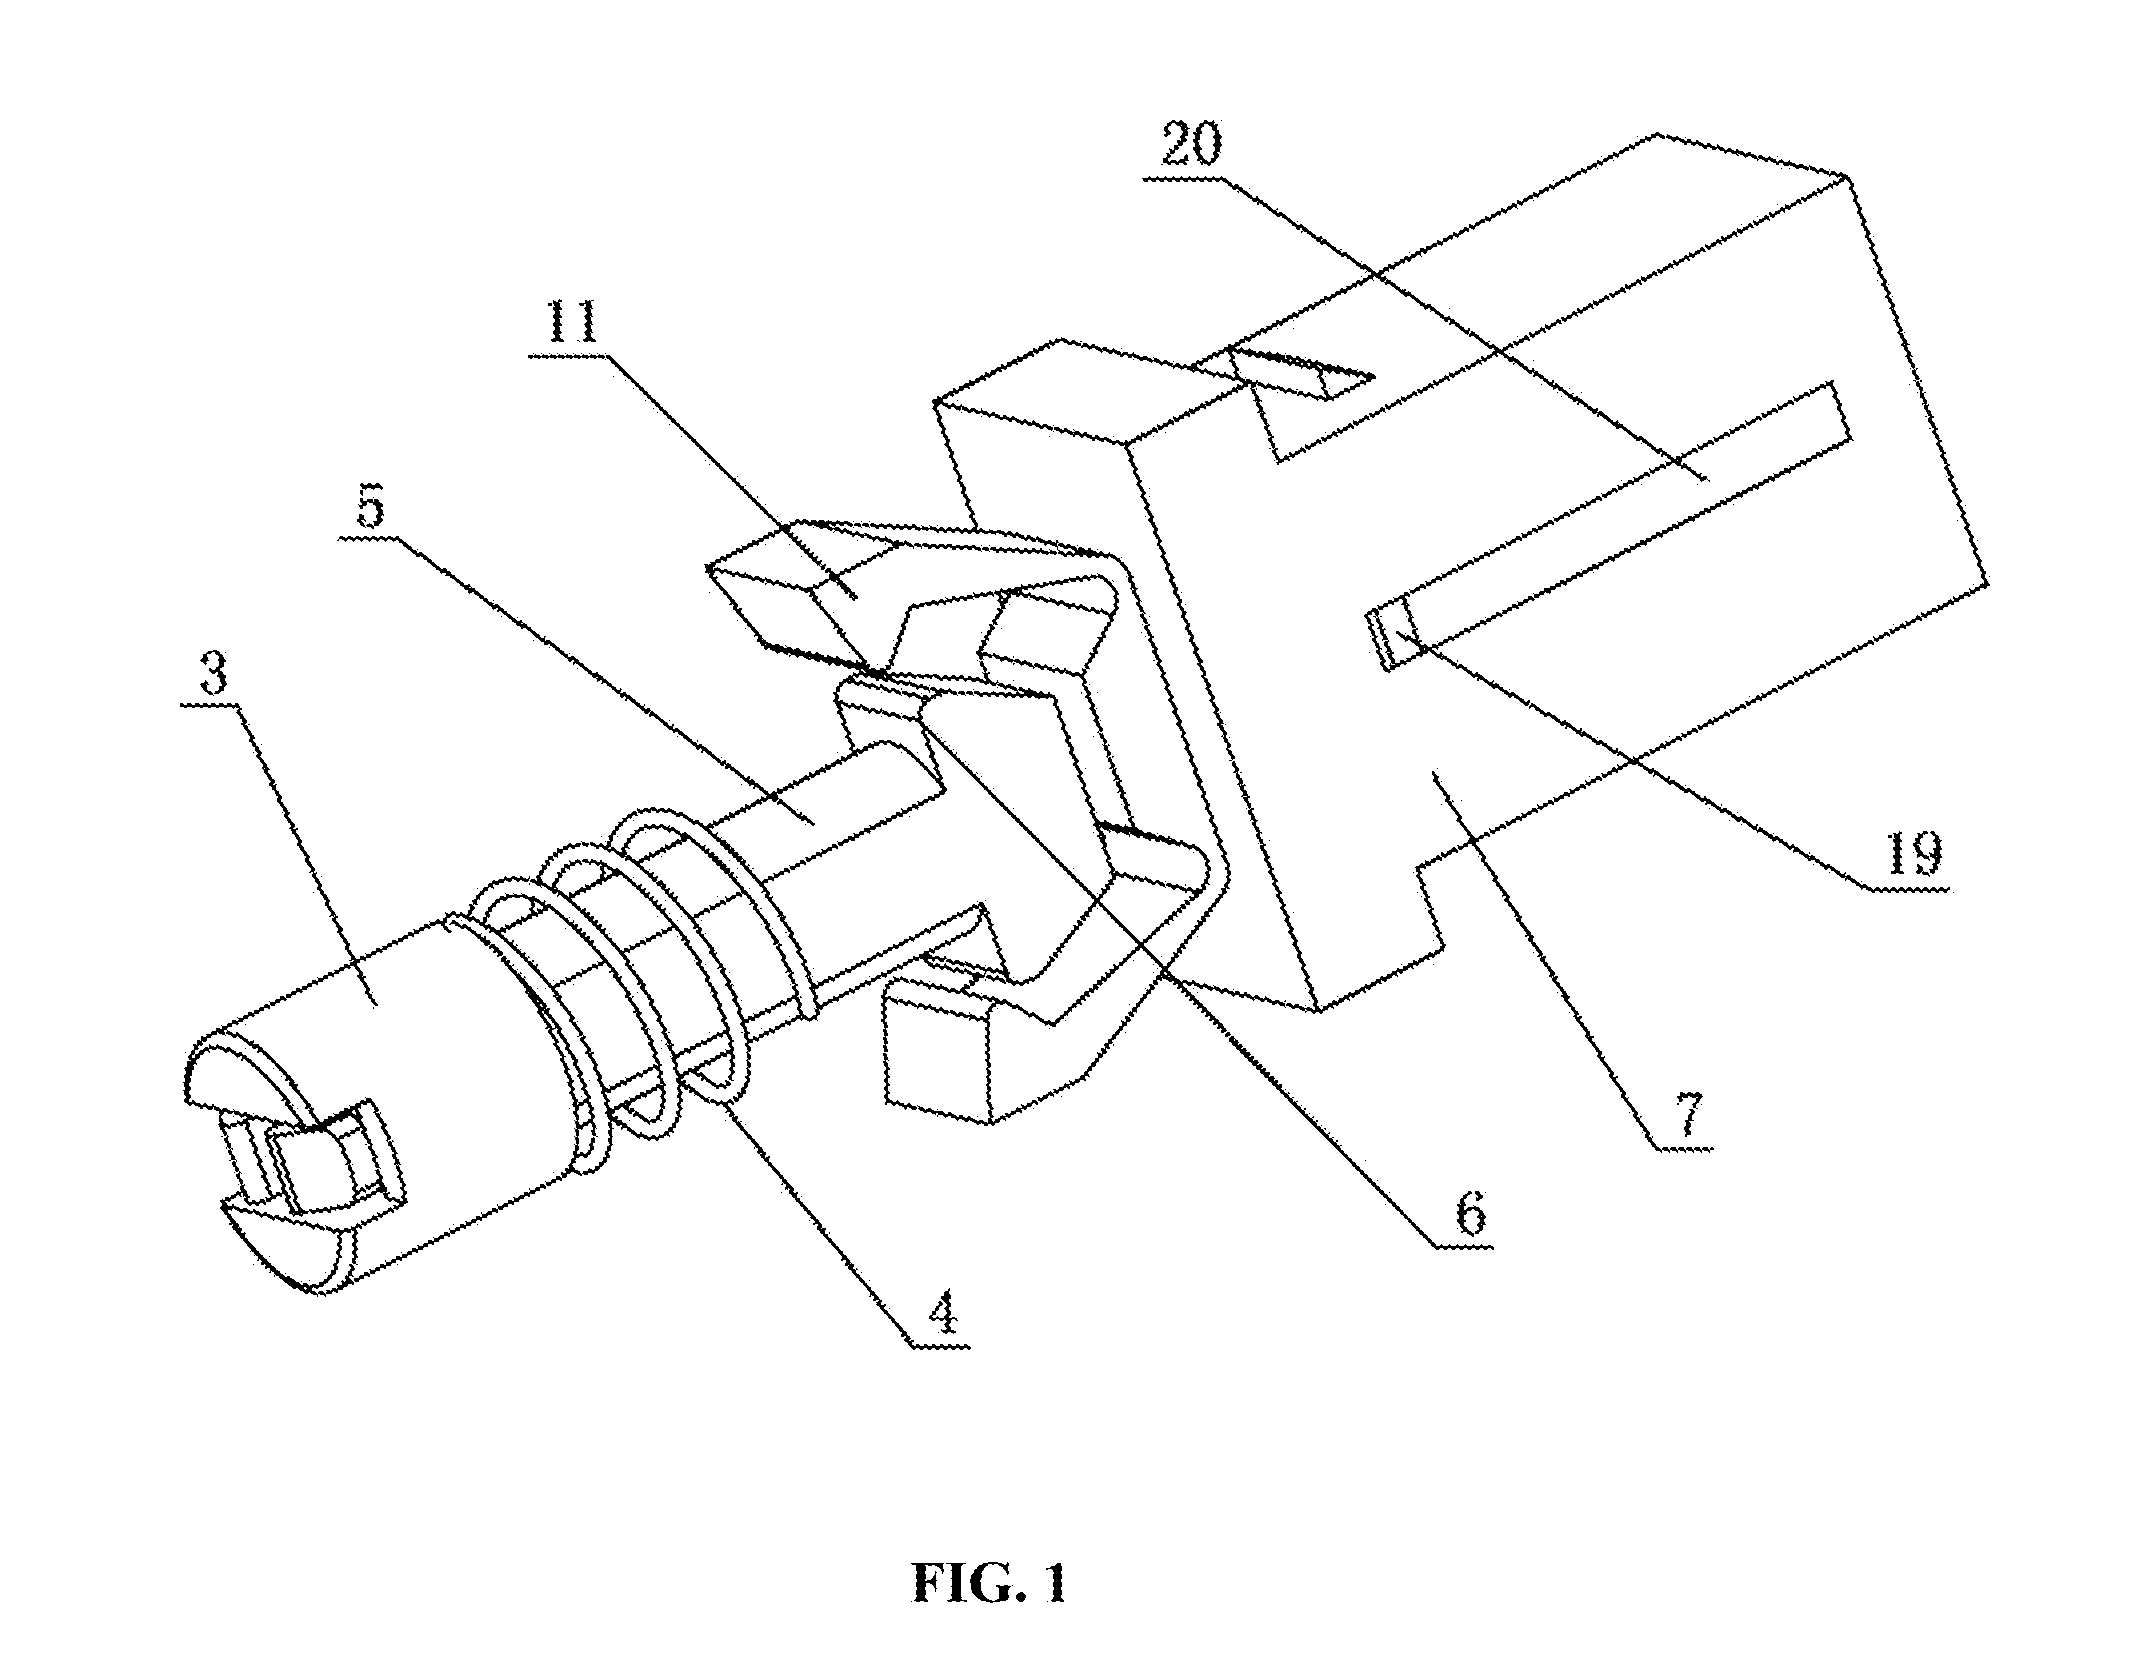 Connecting device for light fixtures